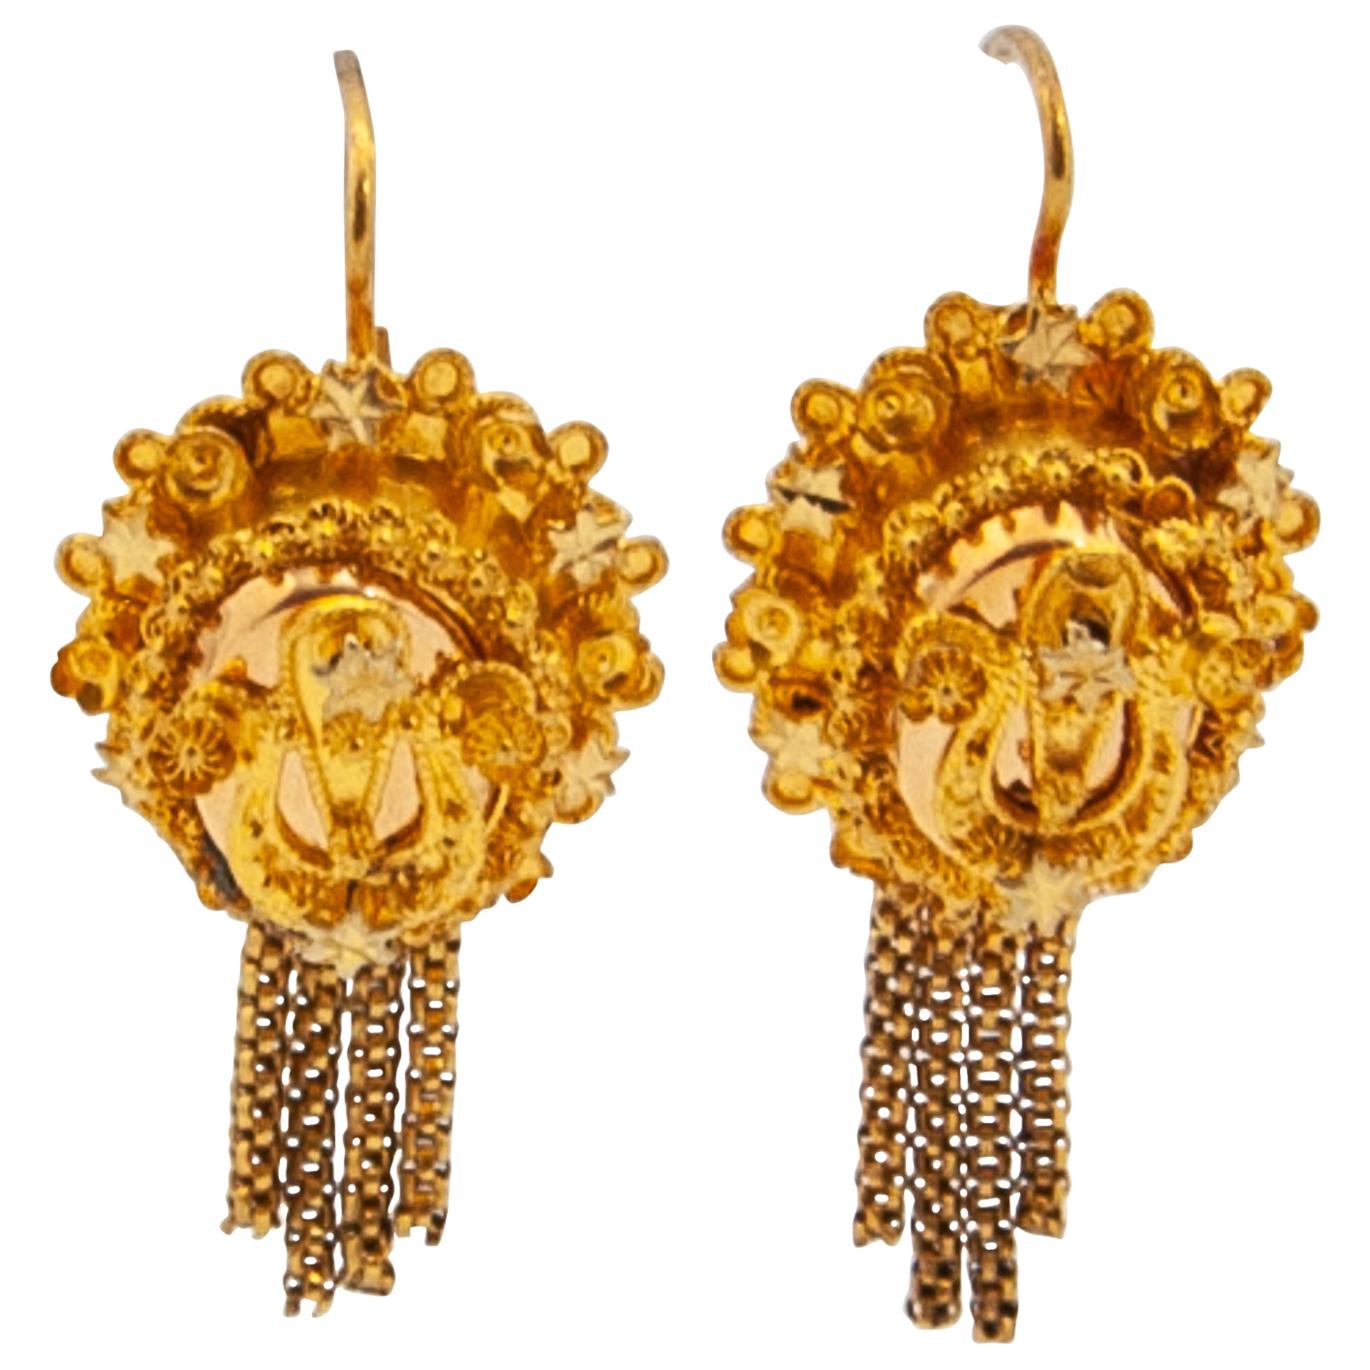 fcity.in - Impon Panchaloga Earring Stud / Fashionable Earrings Studs